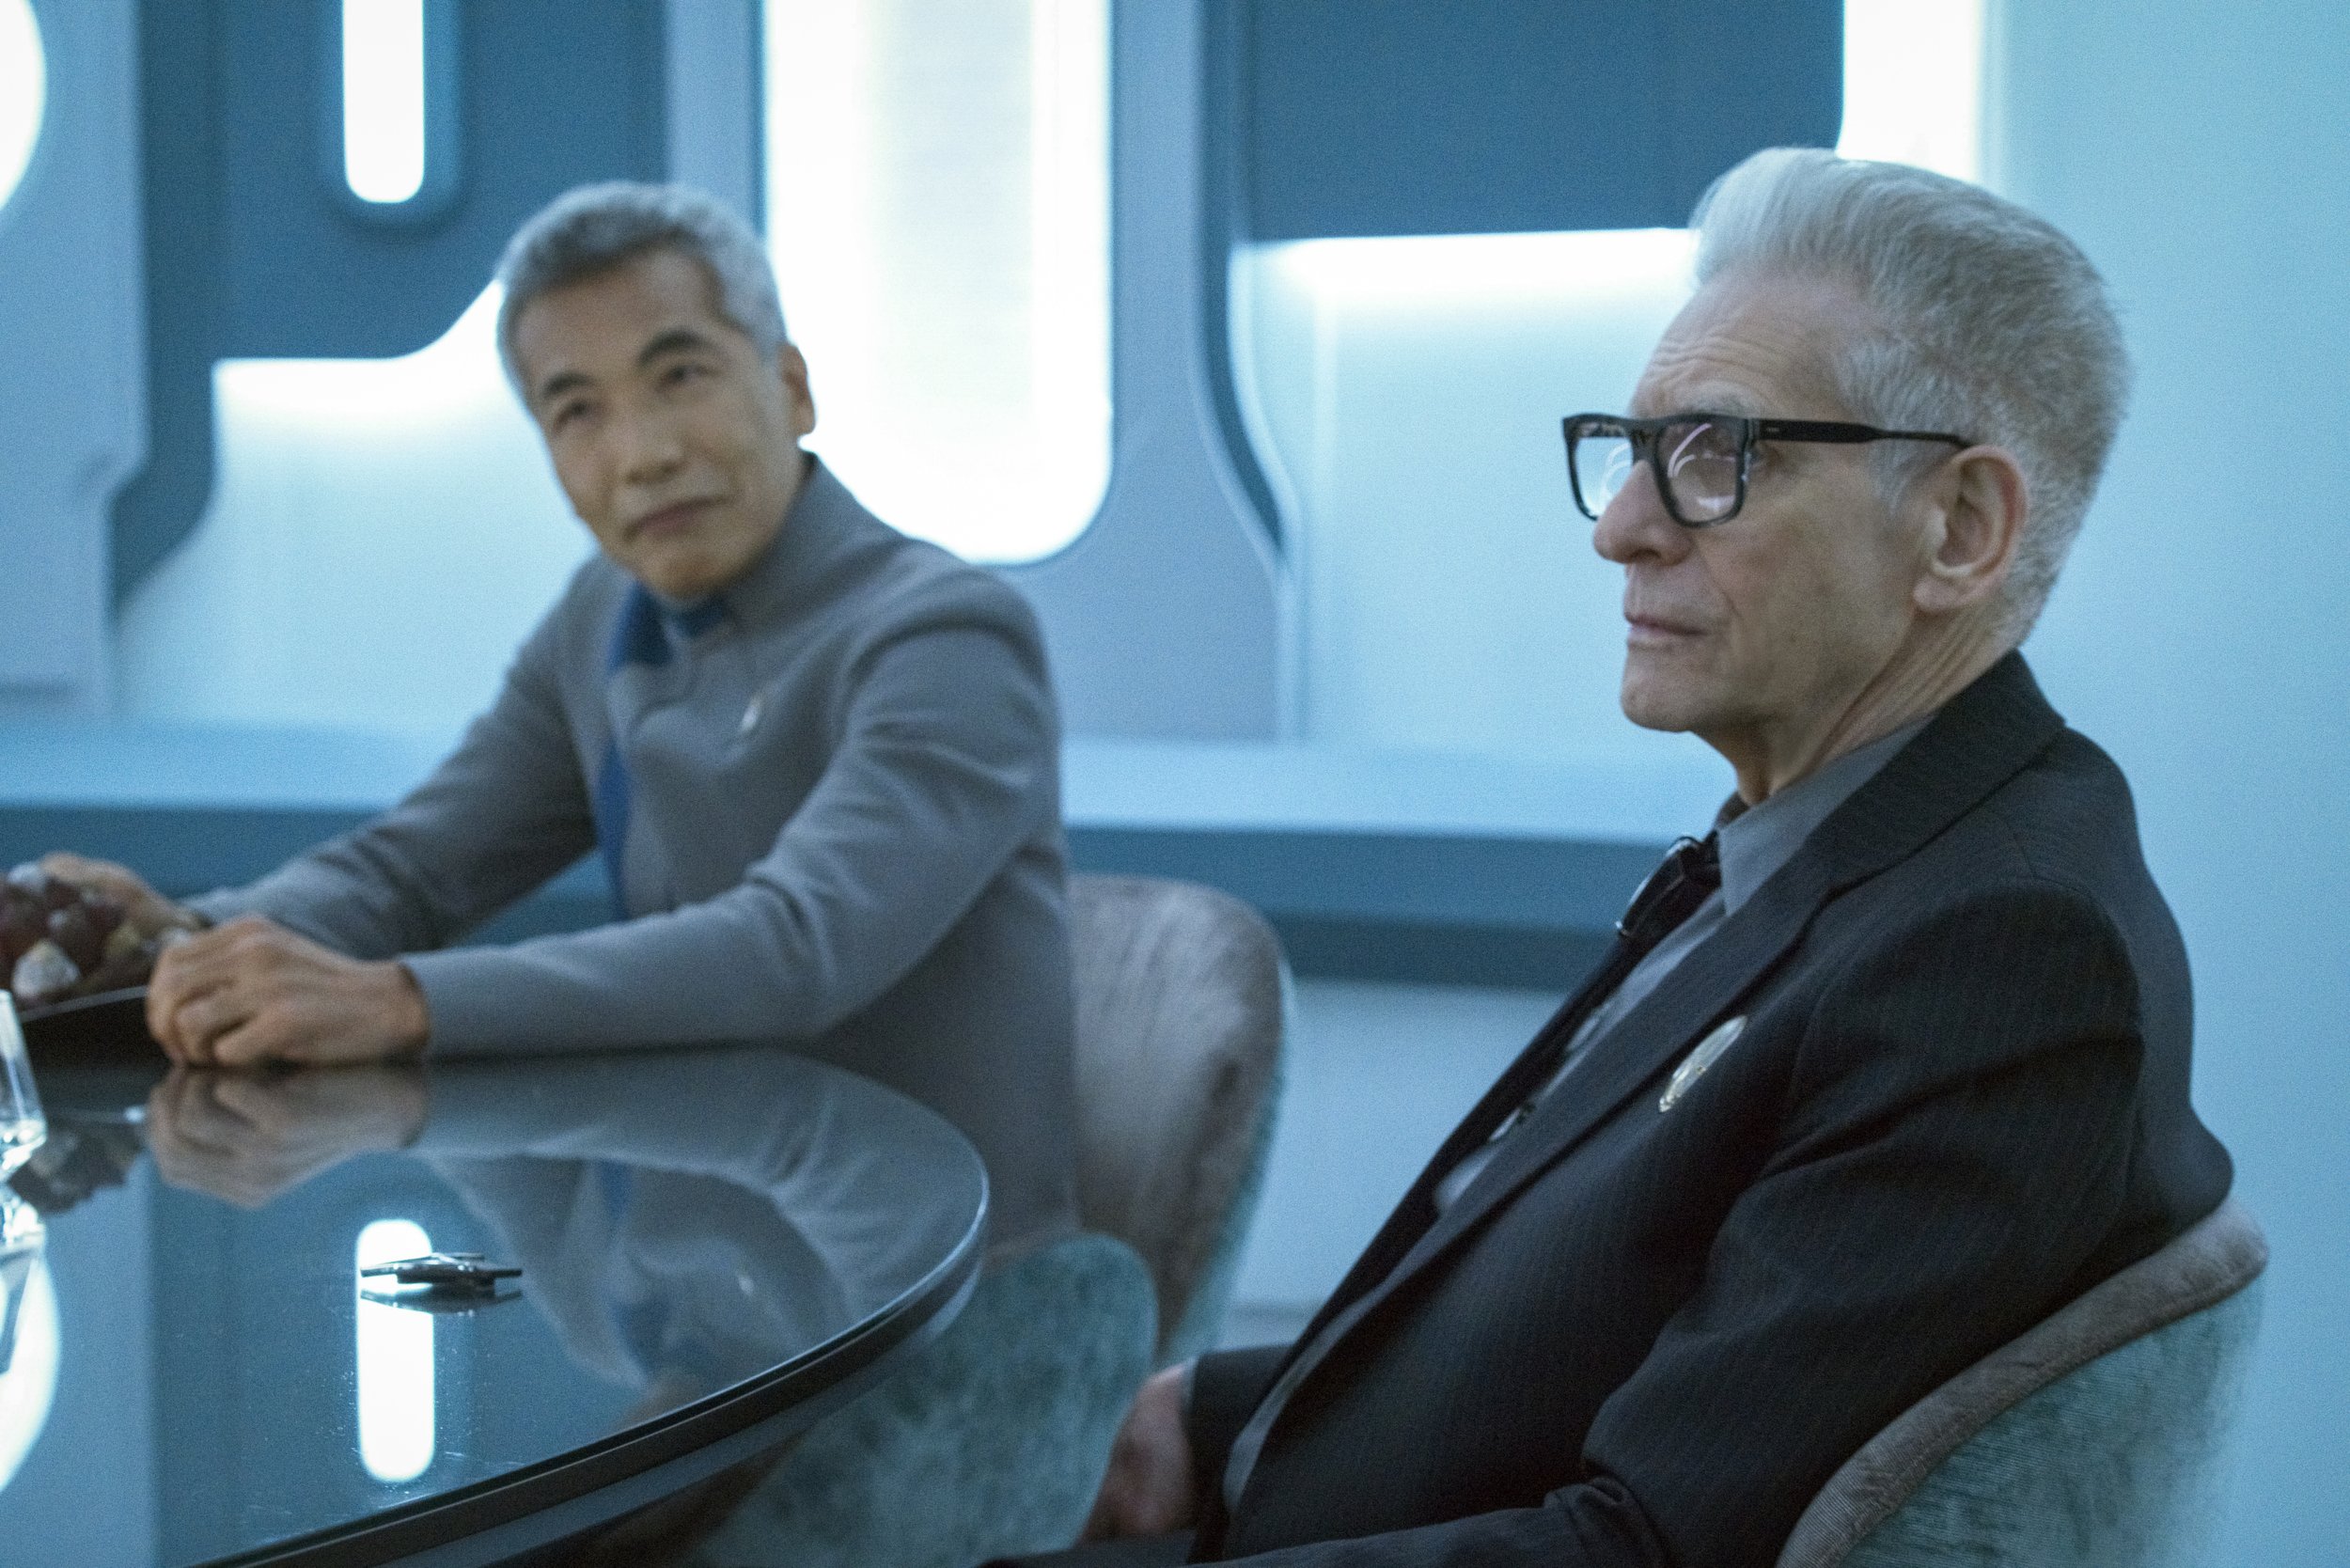   Pictured: Hiro Kanagawa as Dr. Hirai and David Cronenberg as Kovich of the Paramount+ original series STAR TREK: DISCOVERY. Photo Cr: Michael Gibson/Paramount+ (C) 2021 CBS Interactive. All Rights Reserved.  